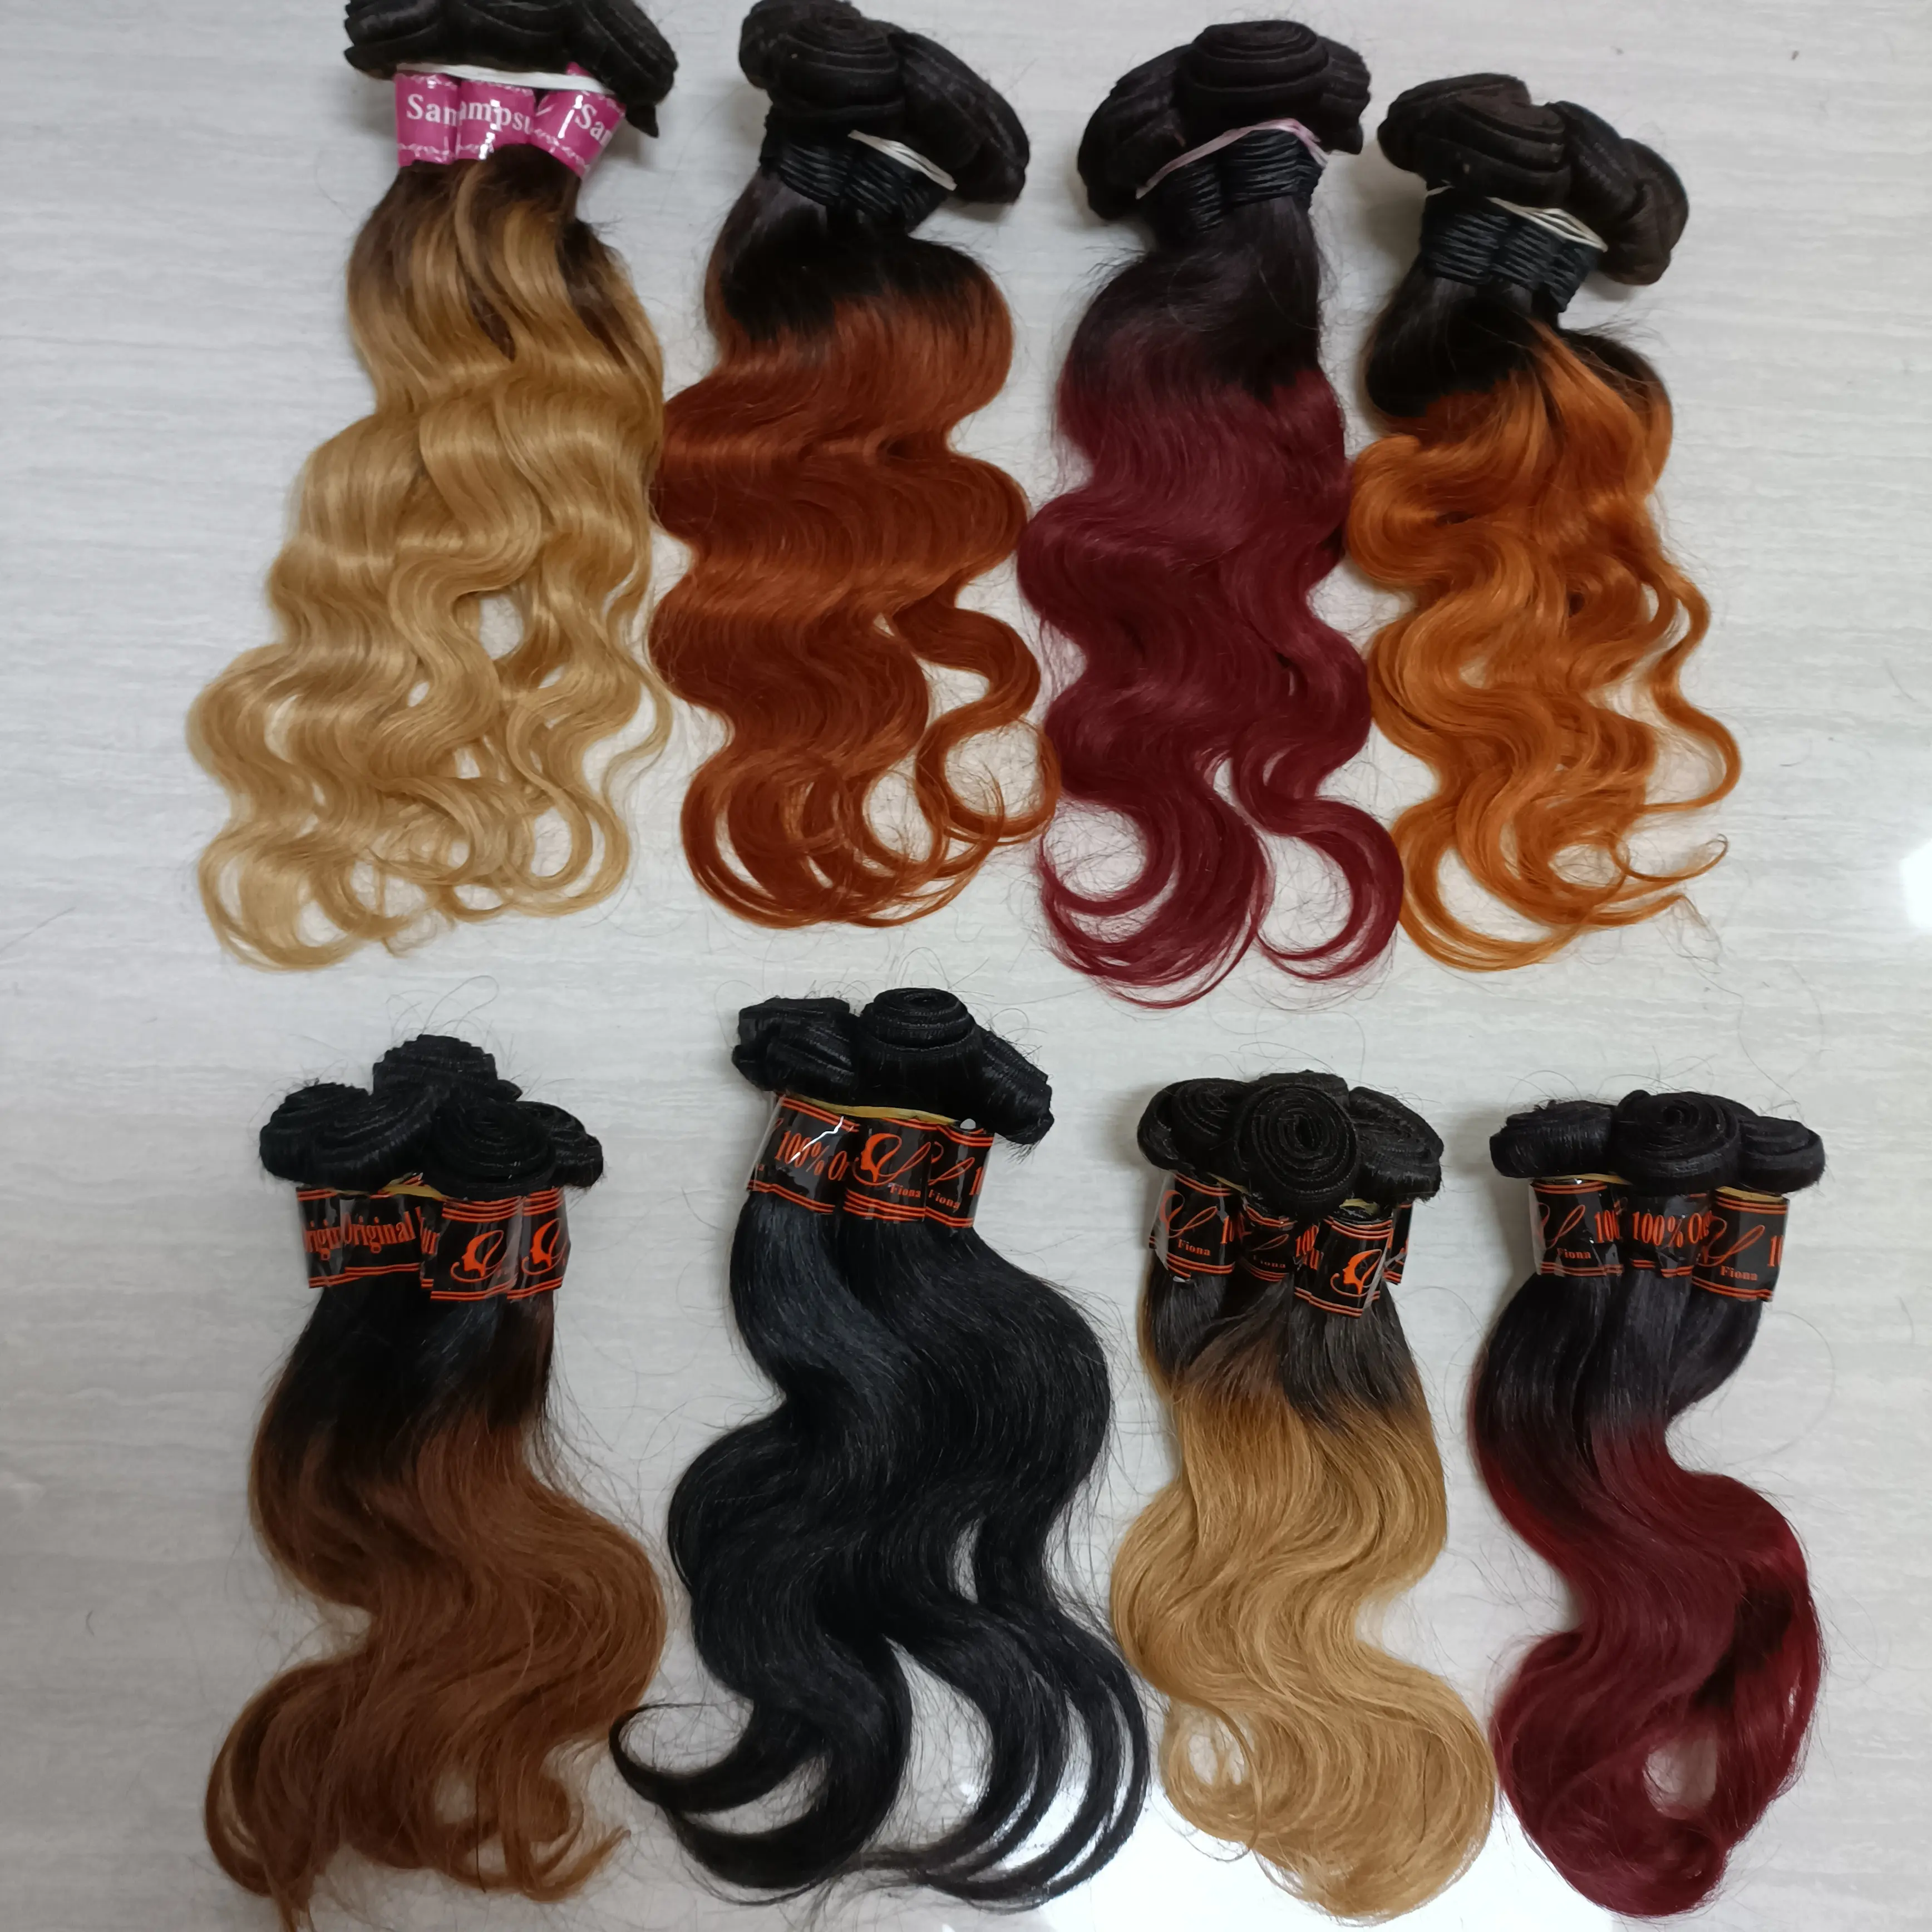 2022 Letsfly Body Wave Latest Fashion Ombre Colored Wet and Wavy Brazilian Remy Hair Human Hair Extensions Bundles Free Shipping